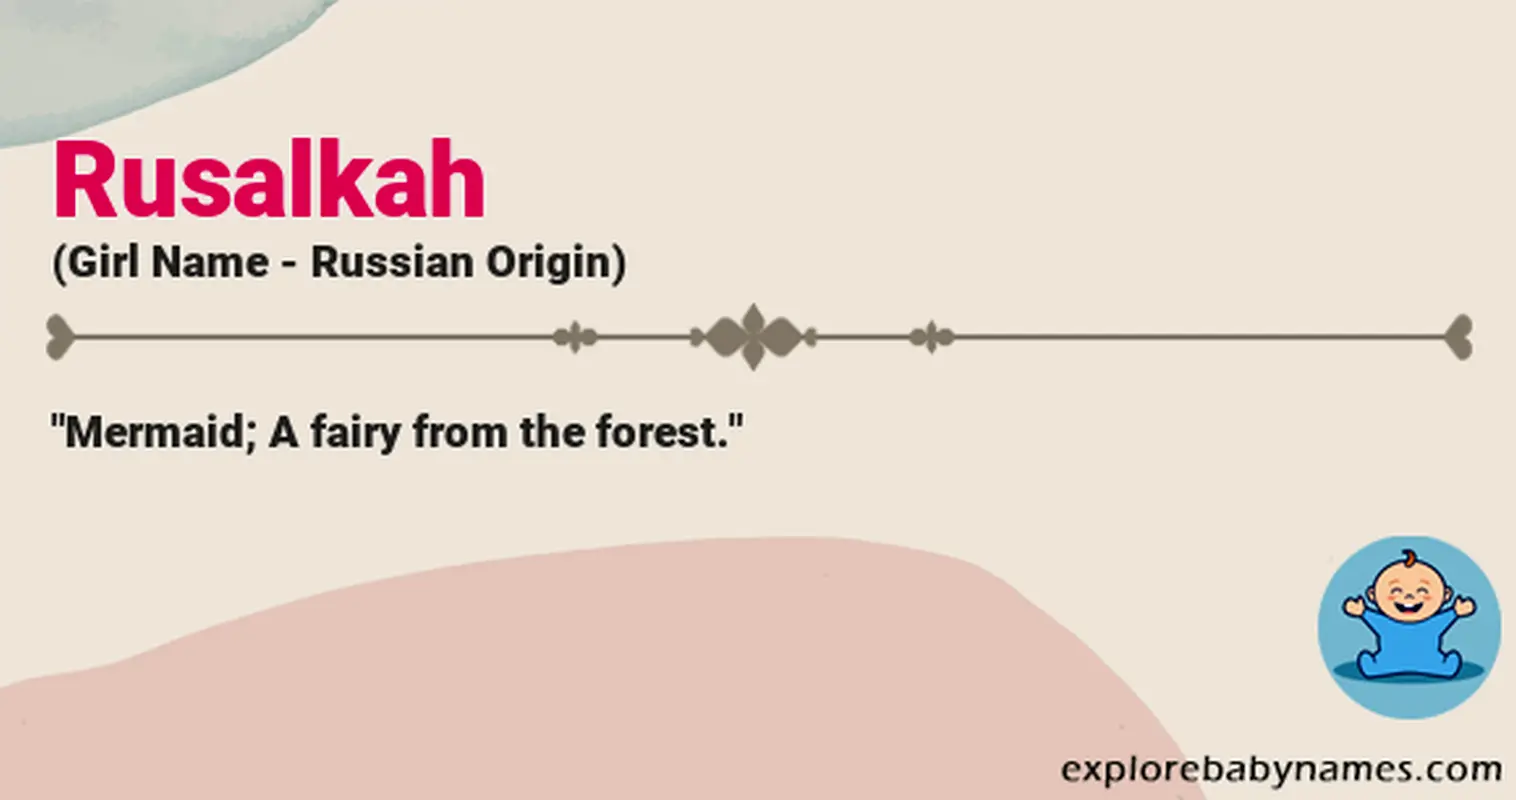 Meaning of Rusalkah